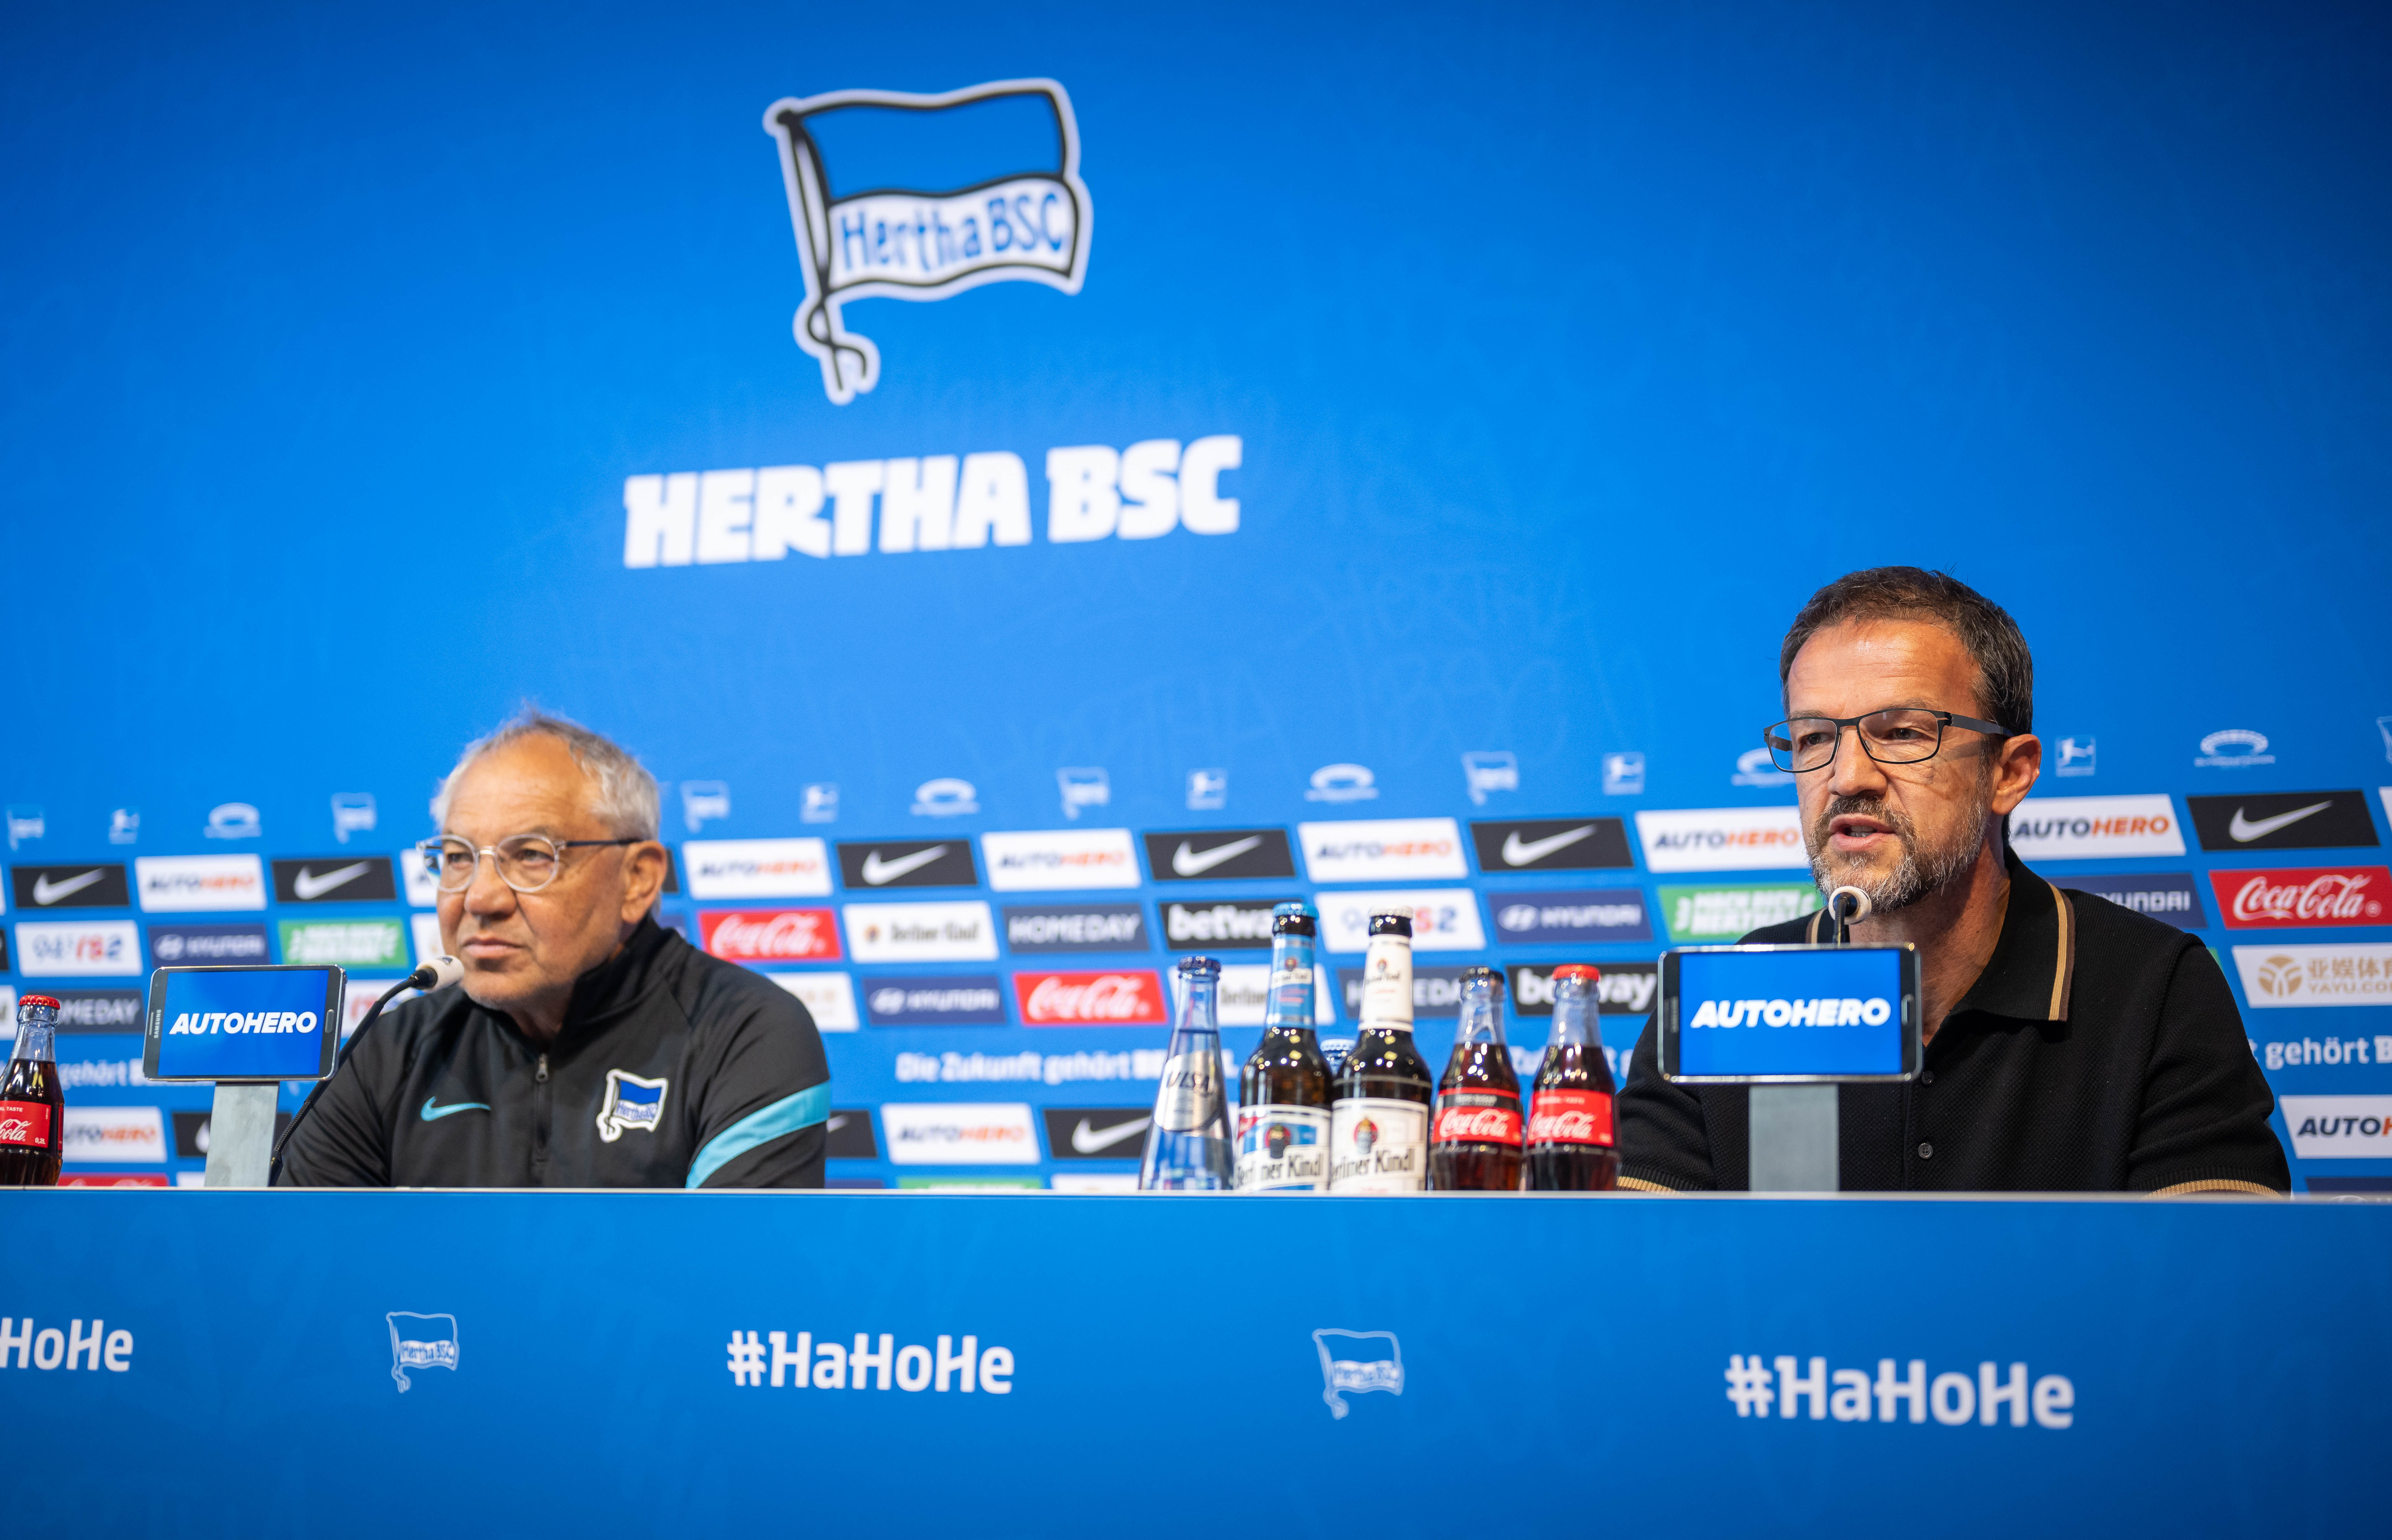 Felix Magath and Fredi Bobic sit at the Hertha BSC press conference panel.